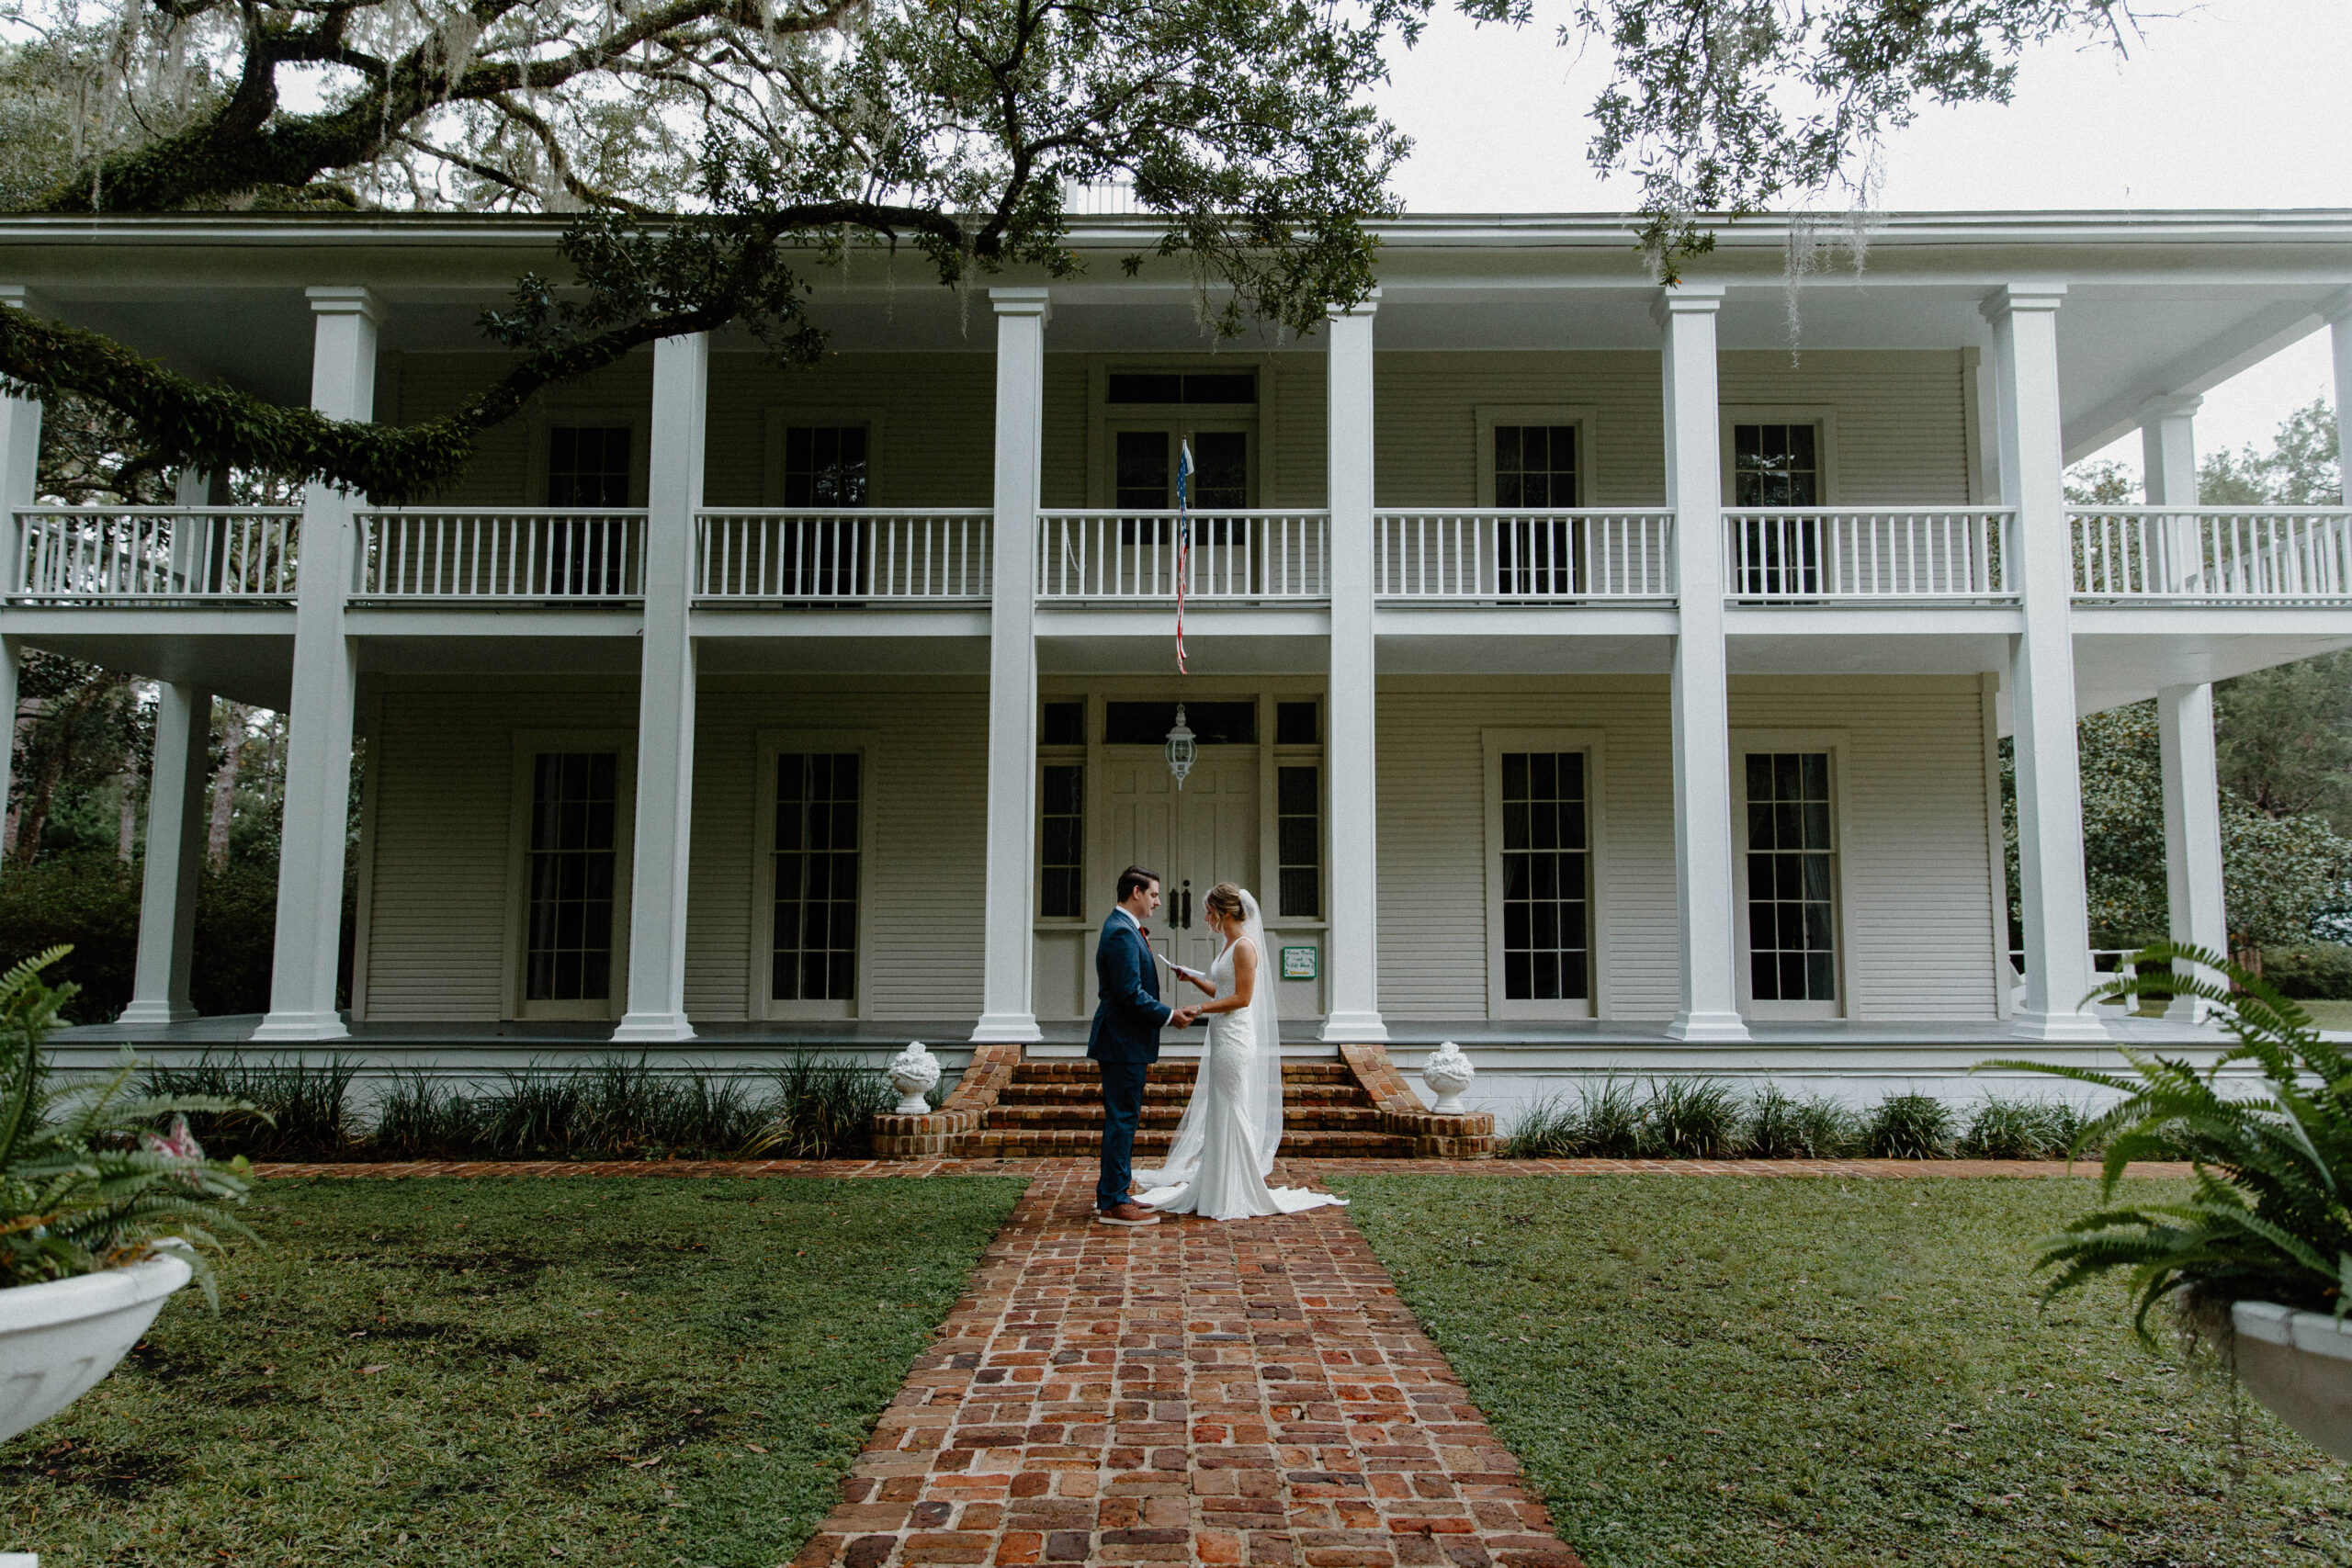 A couple reading private vows to each other in front of a large white house at eden gardens state park